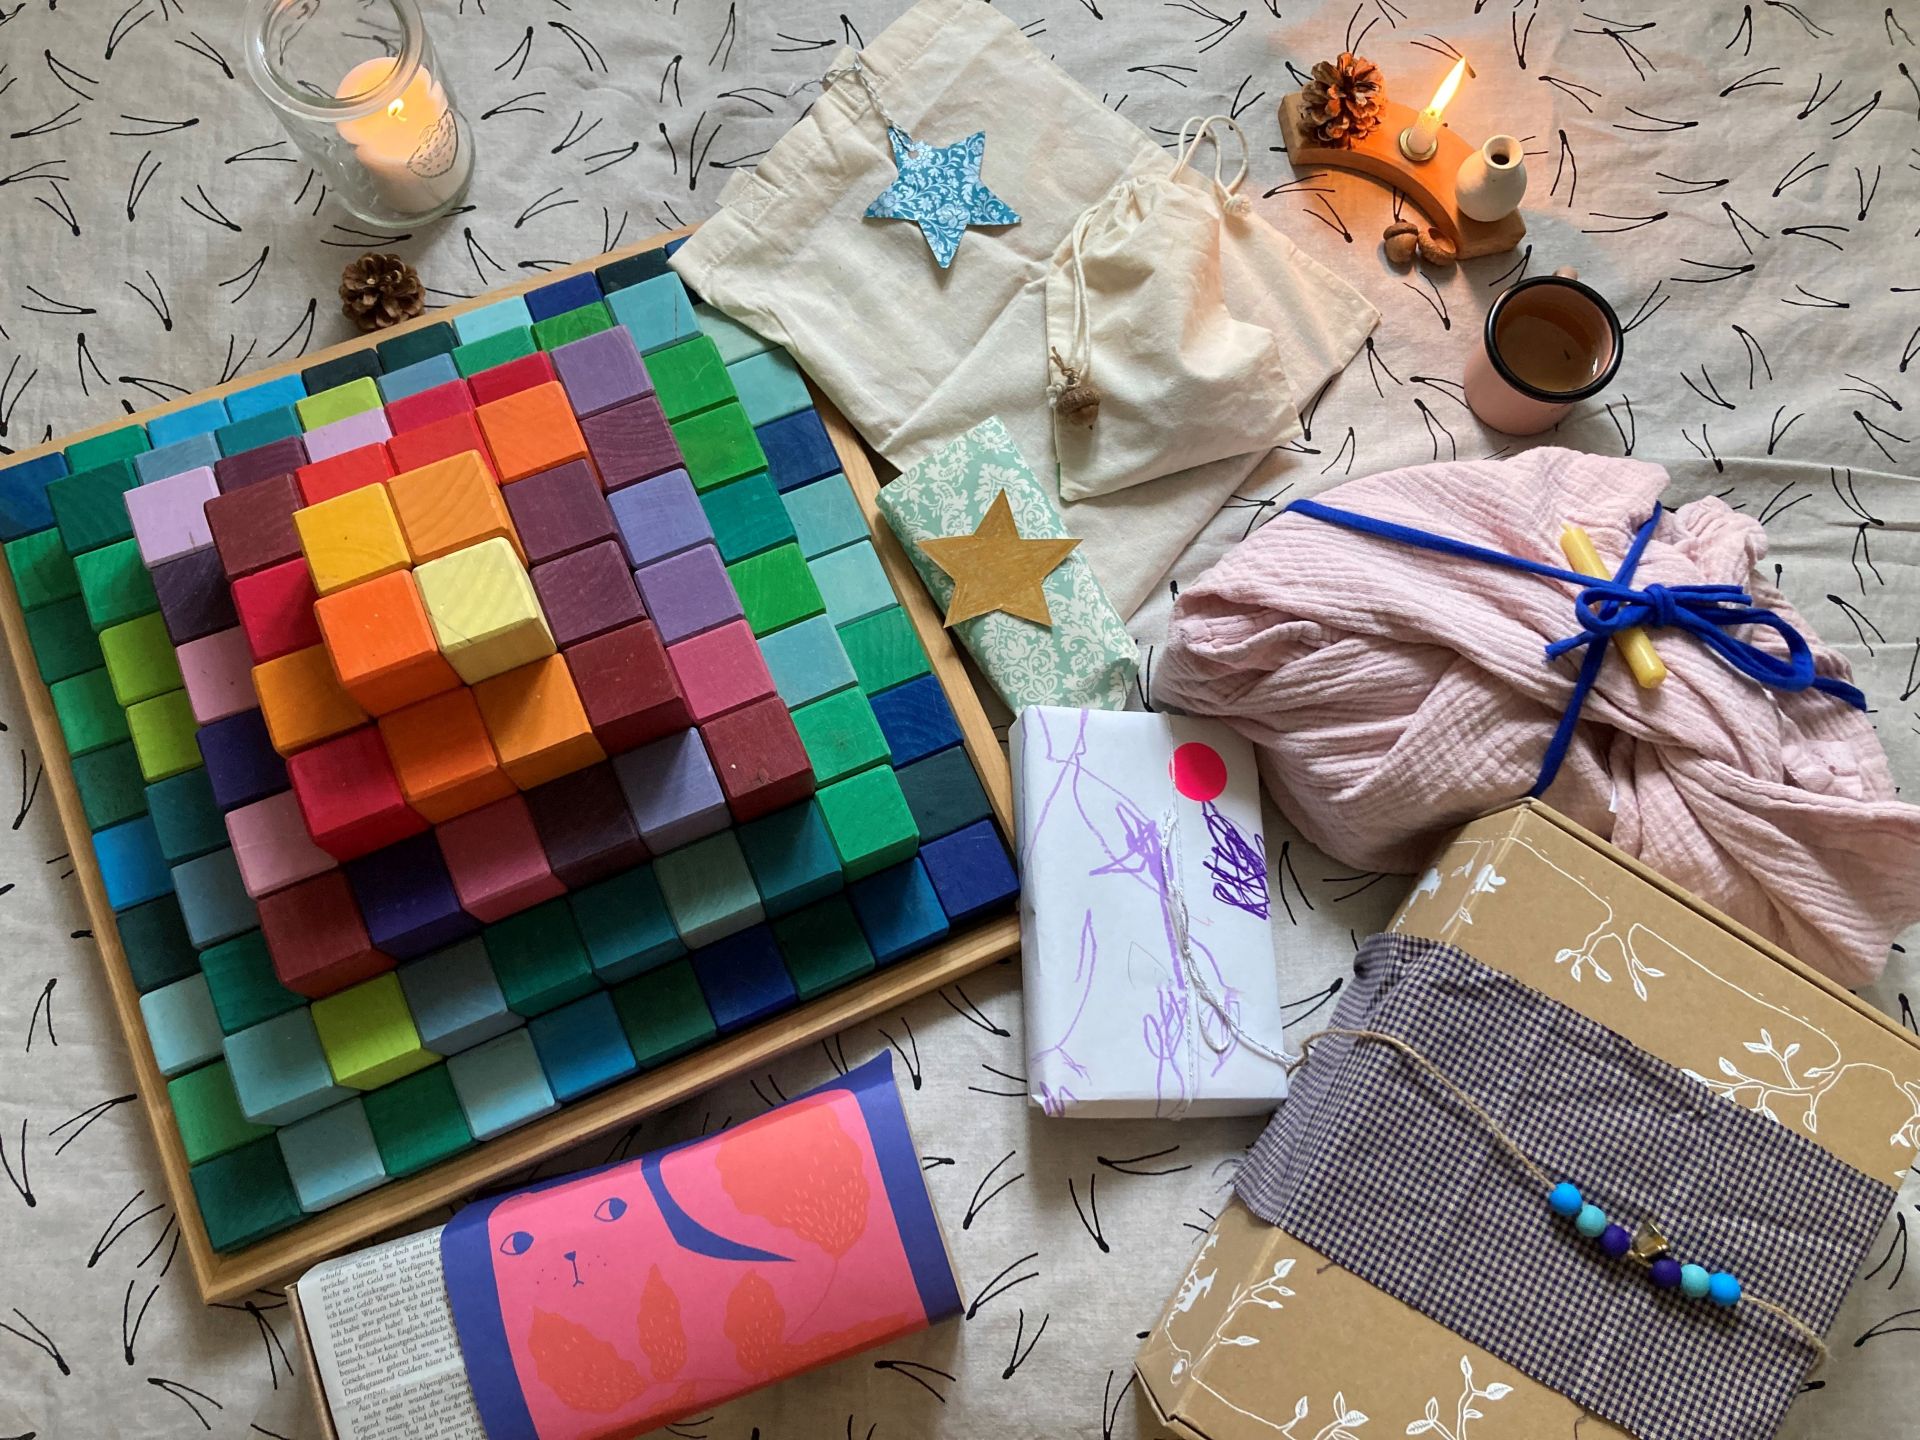 Wrapping gifts sustainably: 7 ideas 